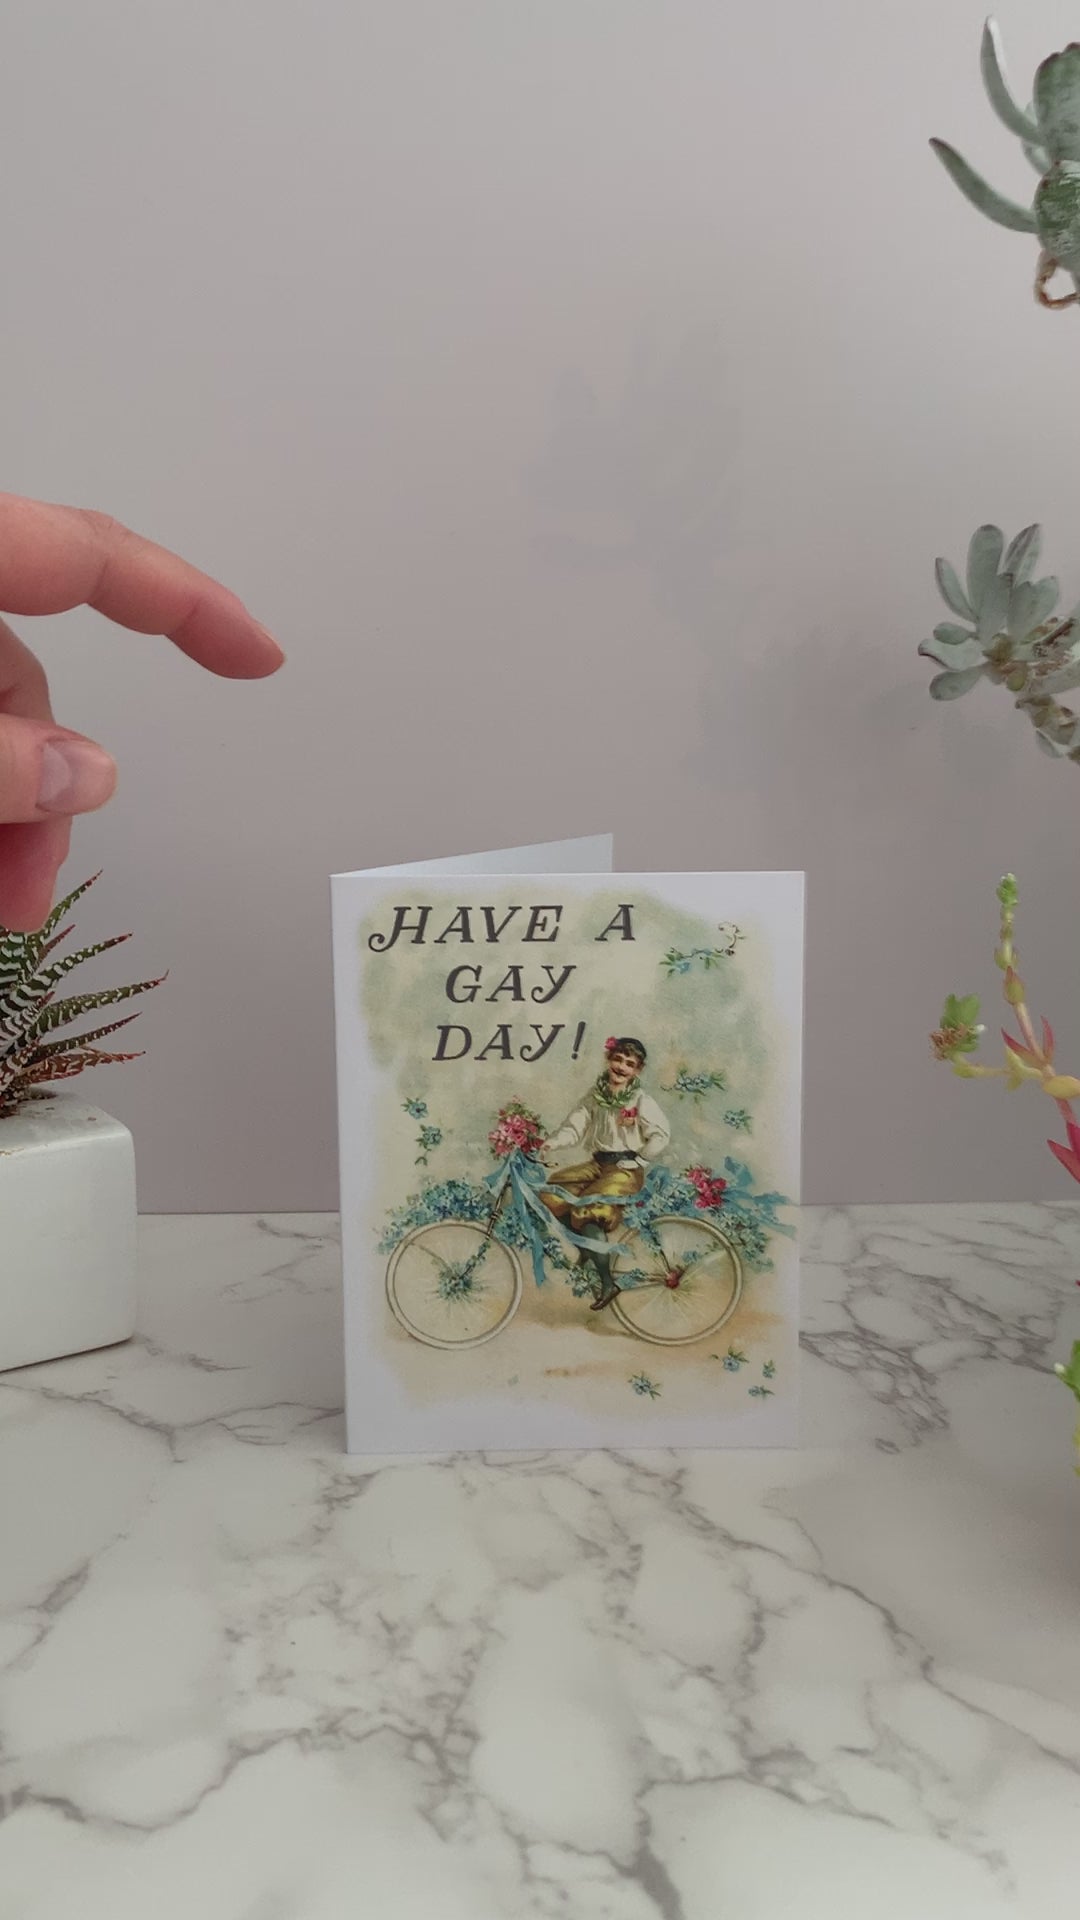 All purpose greeting card that says "Have a gay day!" on the front. Vintage image featuring a happy man with a mustache on a bicycle, with flowers and ribbons. Color pallet is yellows and blues with a little pink. Blank inside.